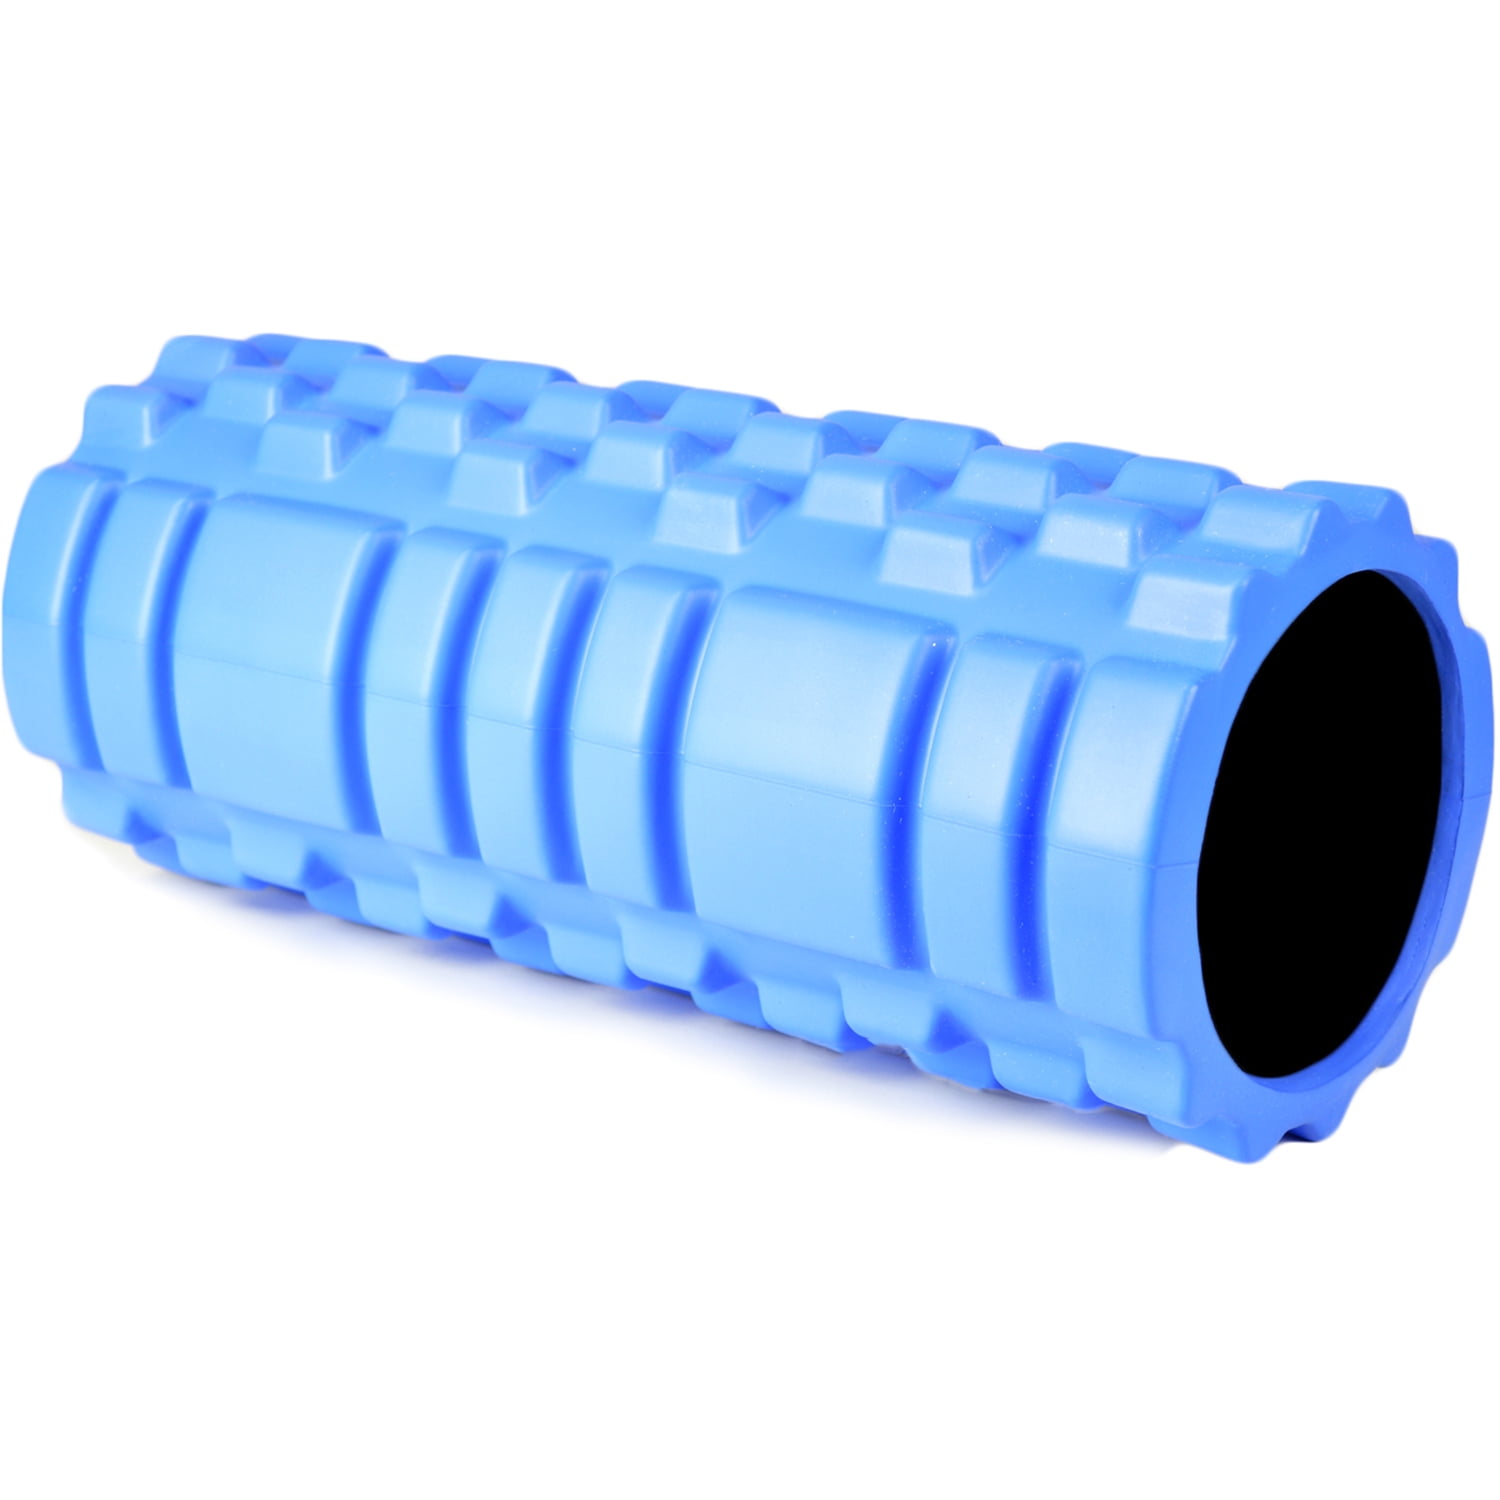 Foam Roller Massager Deep Tissue AccuPoint Workout Fitness Therapy Pain Relief